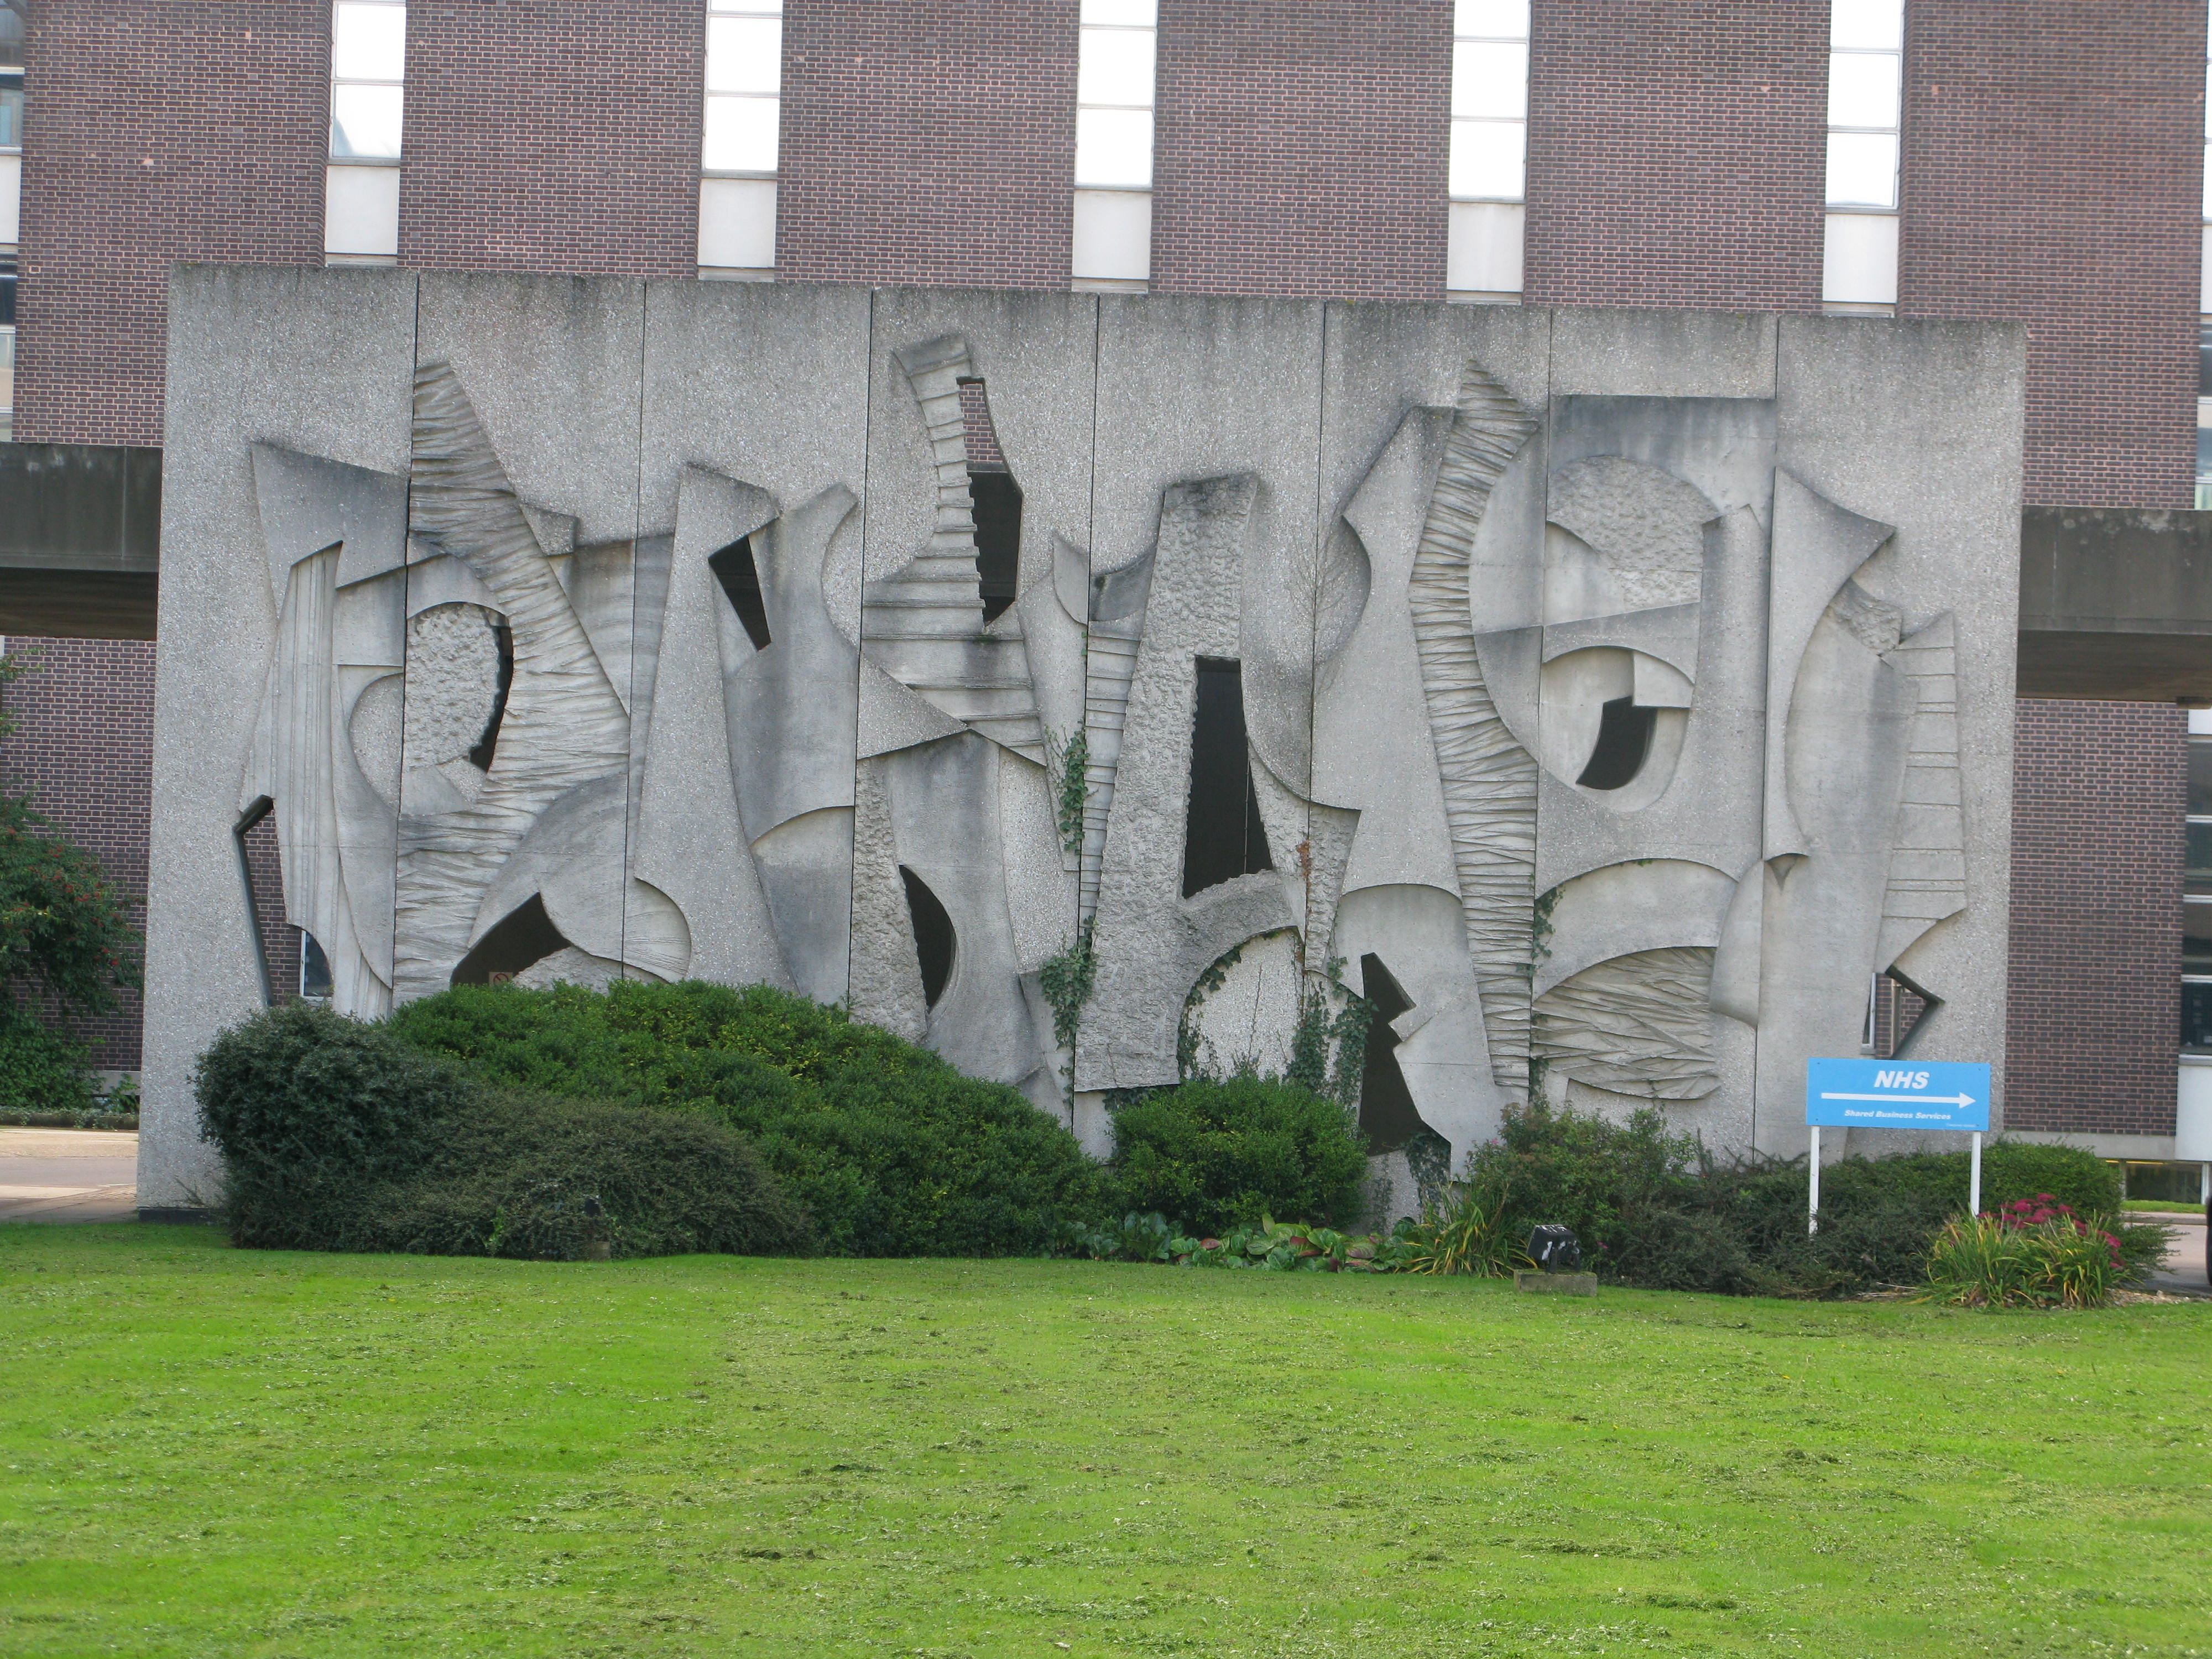 Concrete mural on 6 Oct 2010